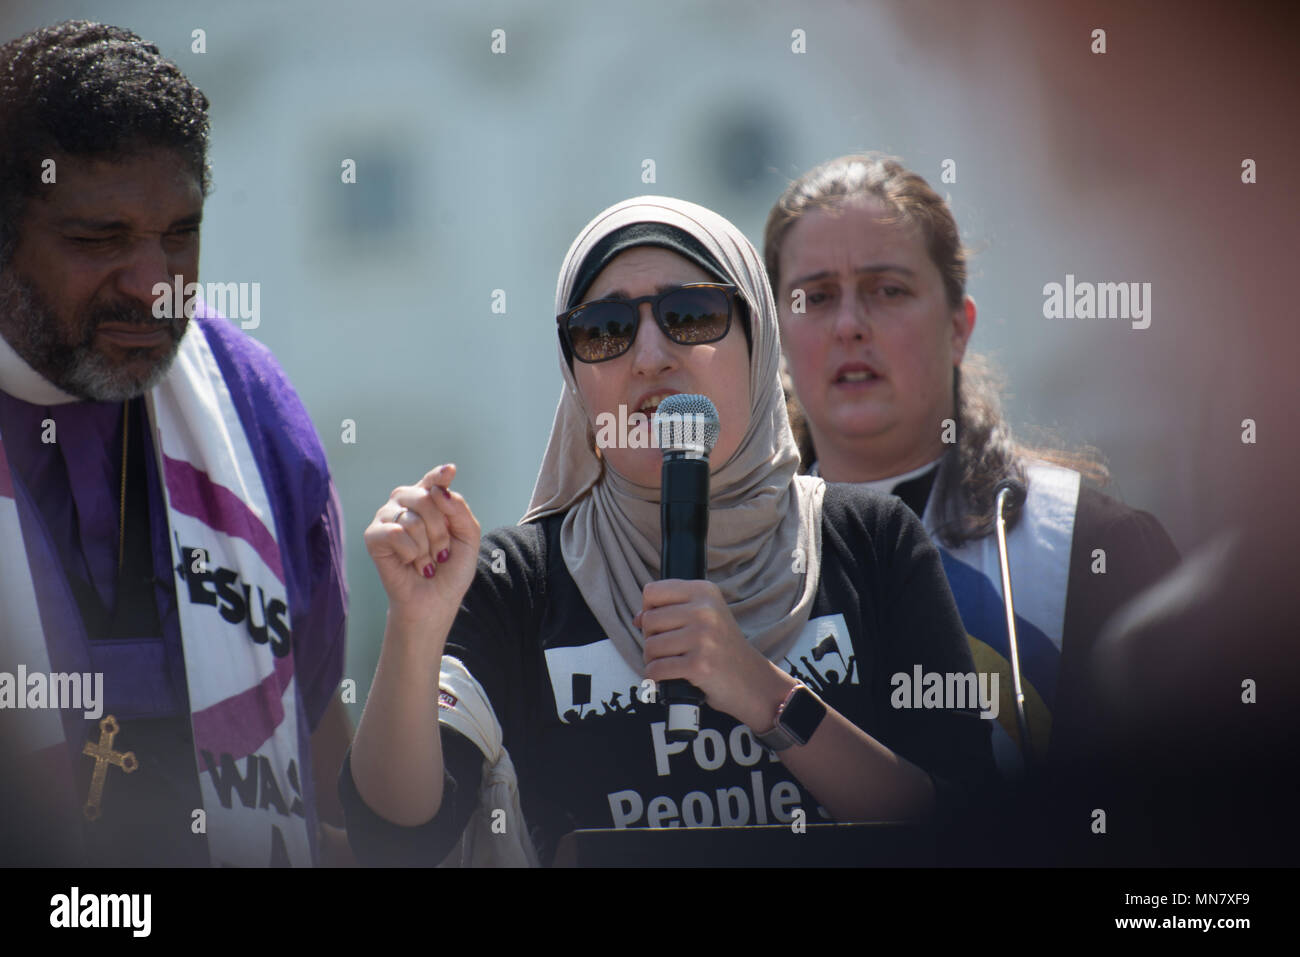 Washington, District of Columbia, USA. 14th May, 2018. Women's March leader Linda Sarsour speaks at a rally for the Poor People's Campaign at the U.S. Capitol. Several dozen people were arrested and later released. Credit: Erin Scott/ZUMA Wire/Alamy Live News Stock Photo